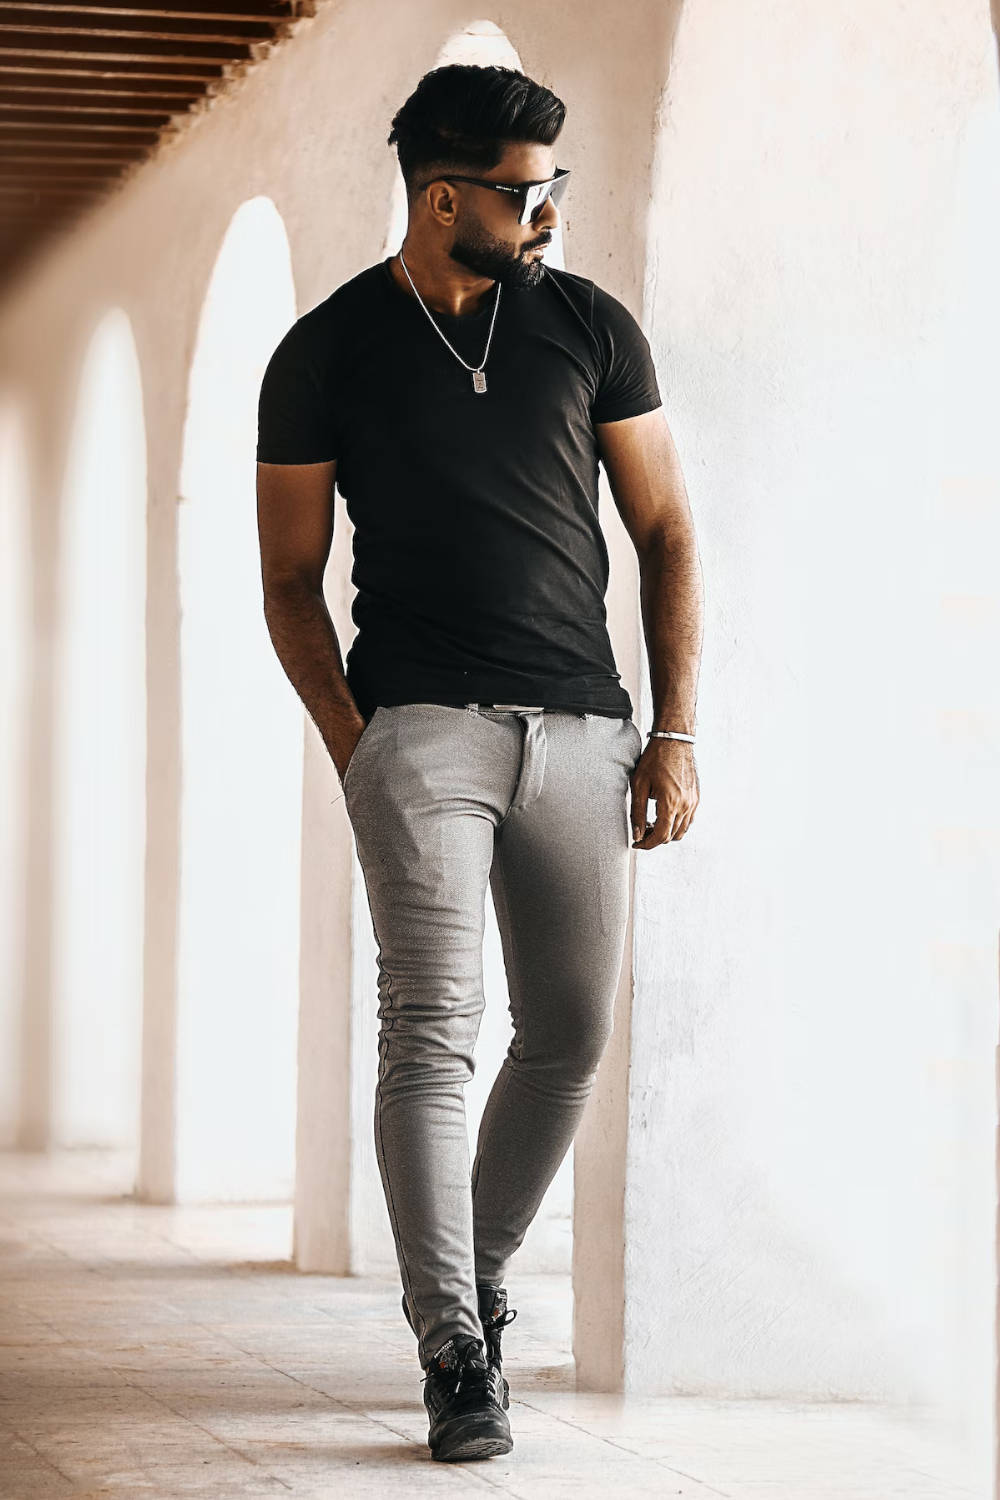 20 Most Attractive Men's Outfits That Girls Like | Panaprium